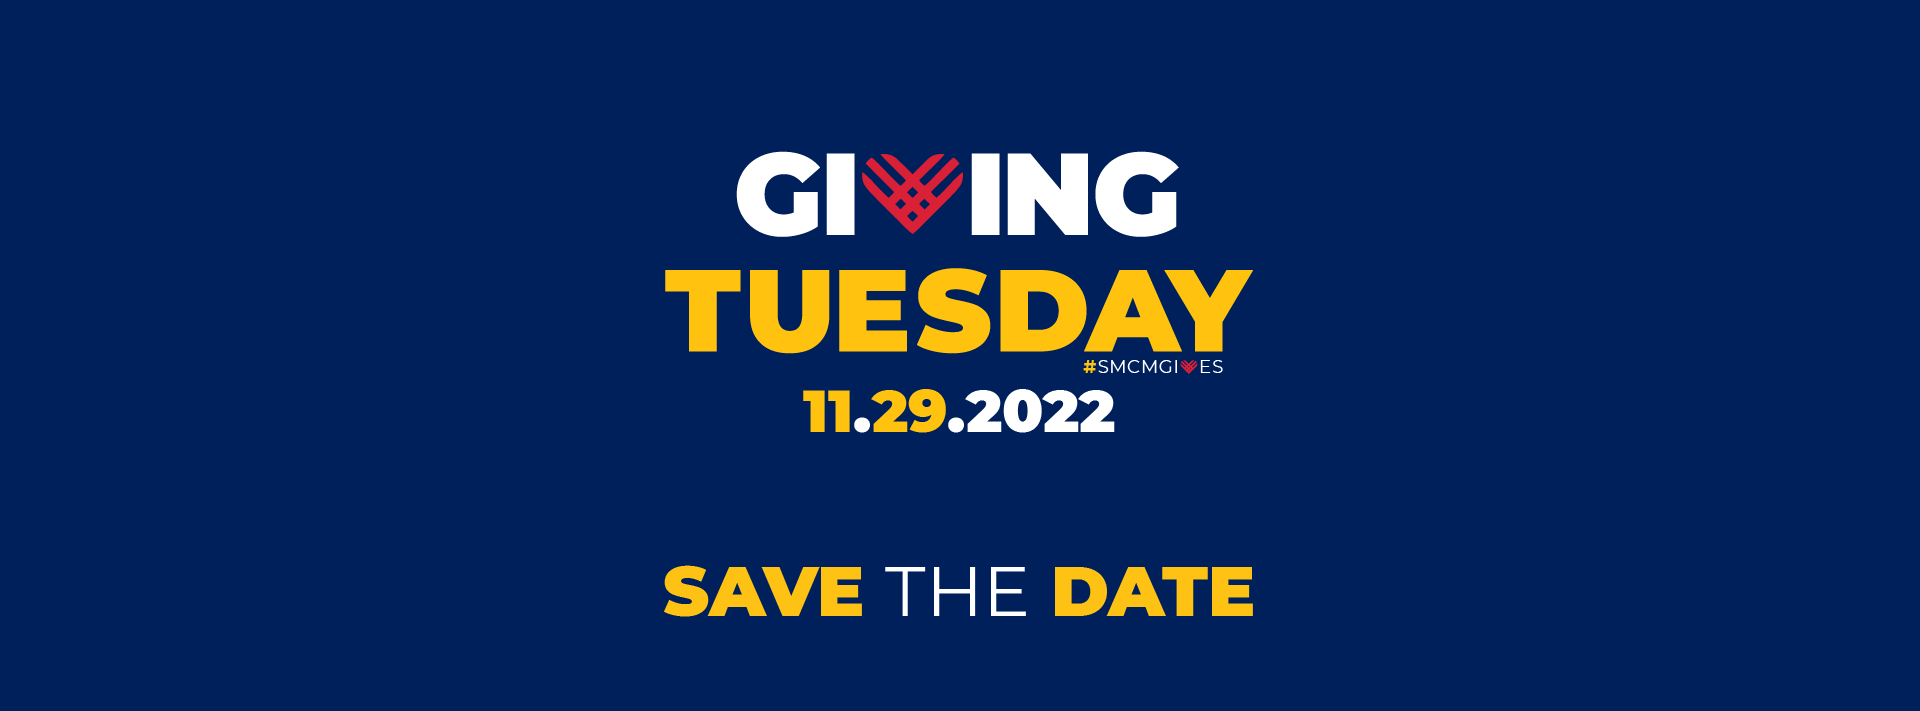 Giving Tuesday 11.29.2022 Save The Date